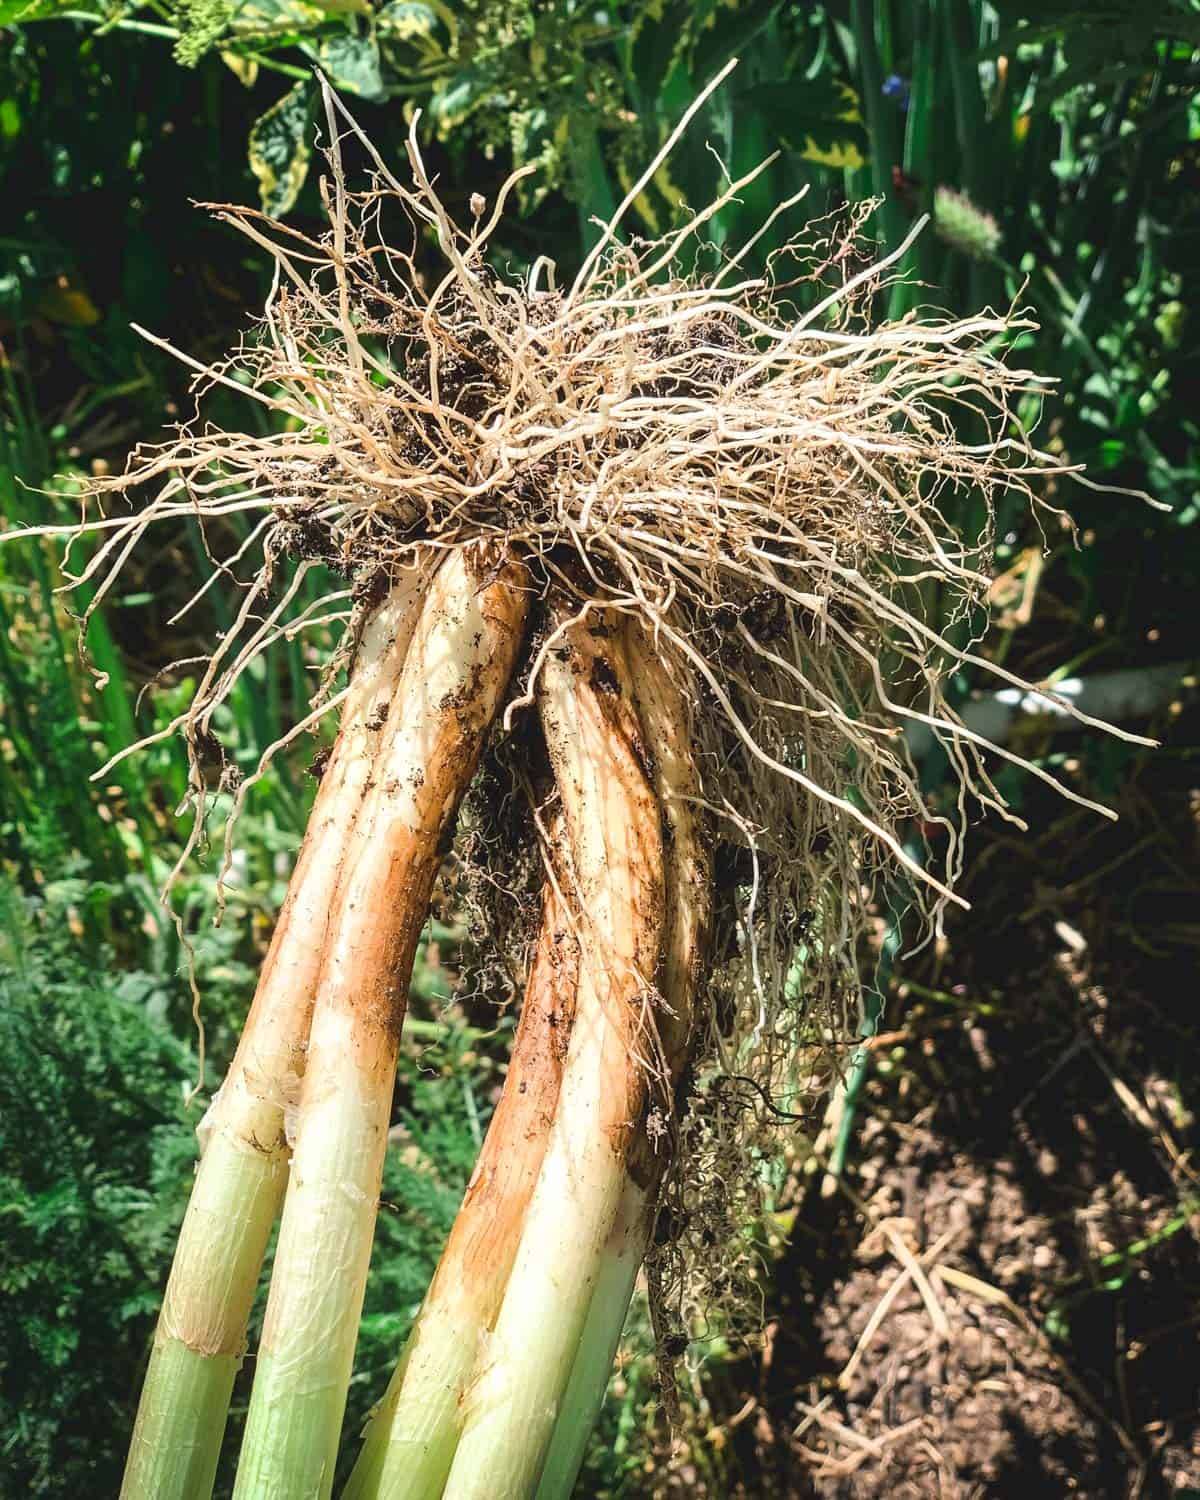 The roots and underground section of a walking onion, which look similar to large green onions. 